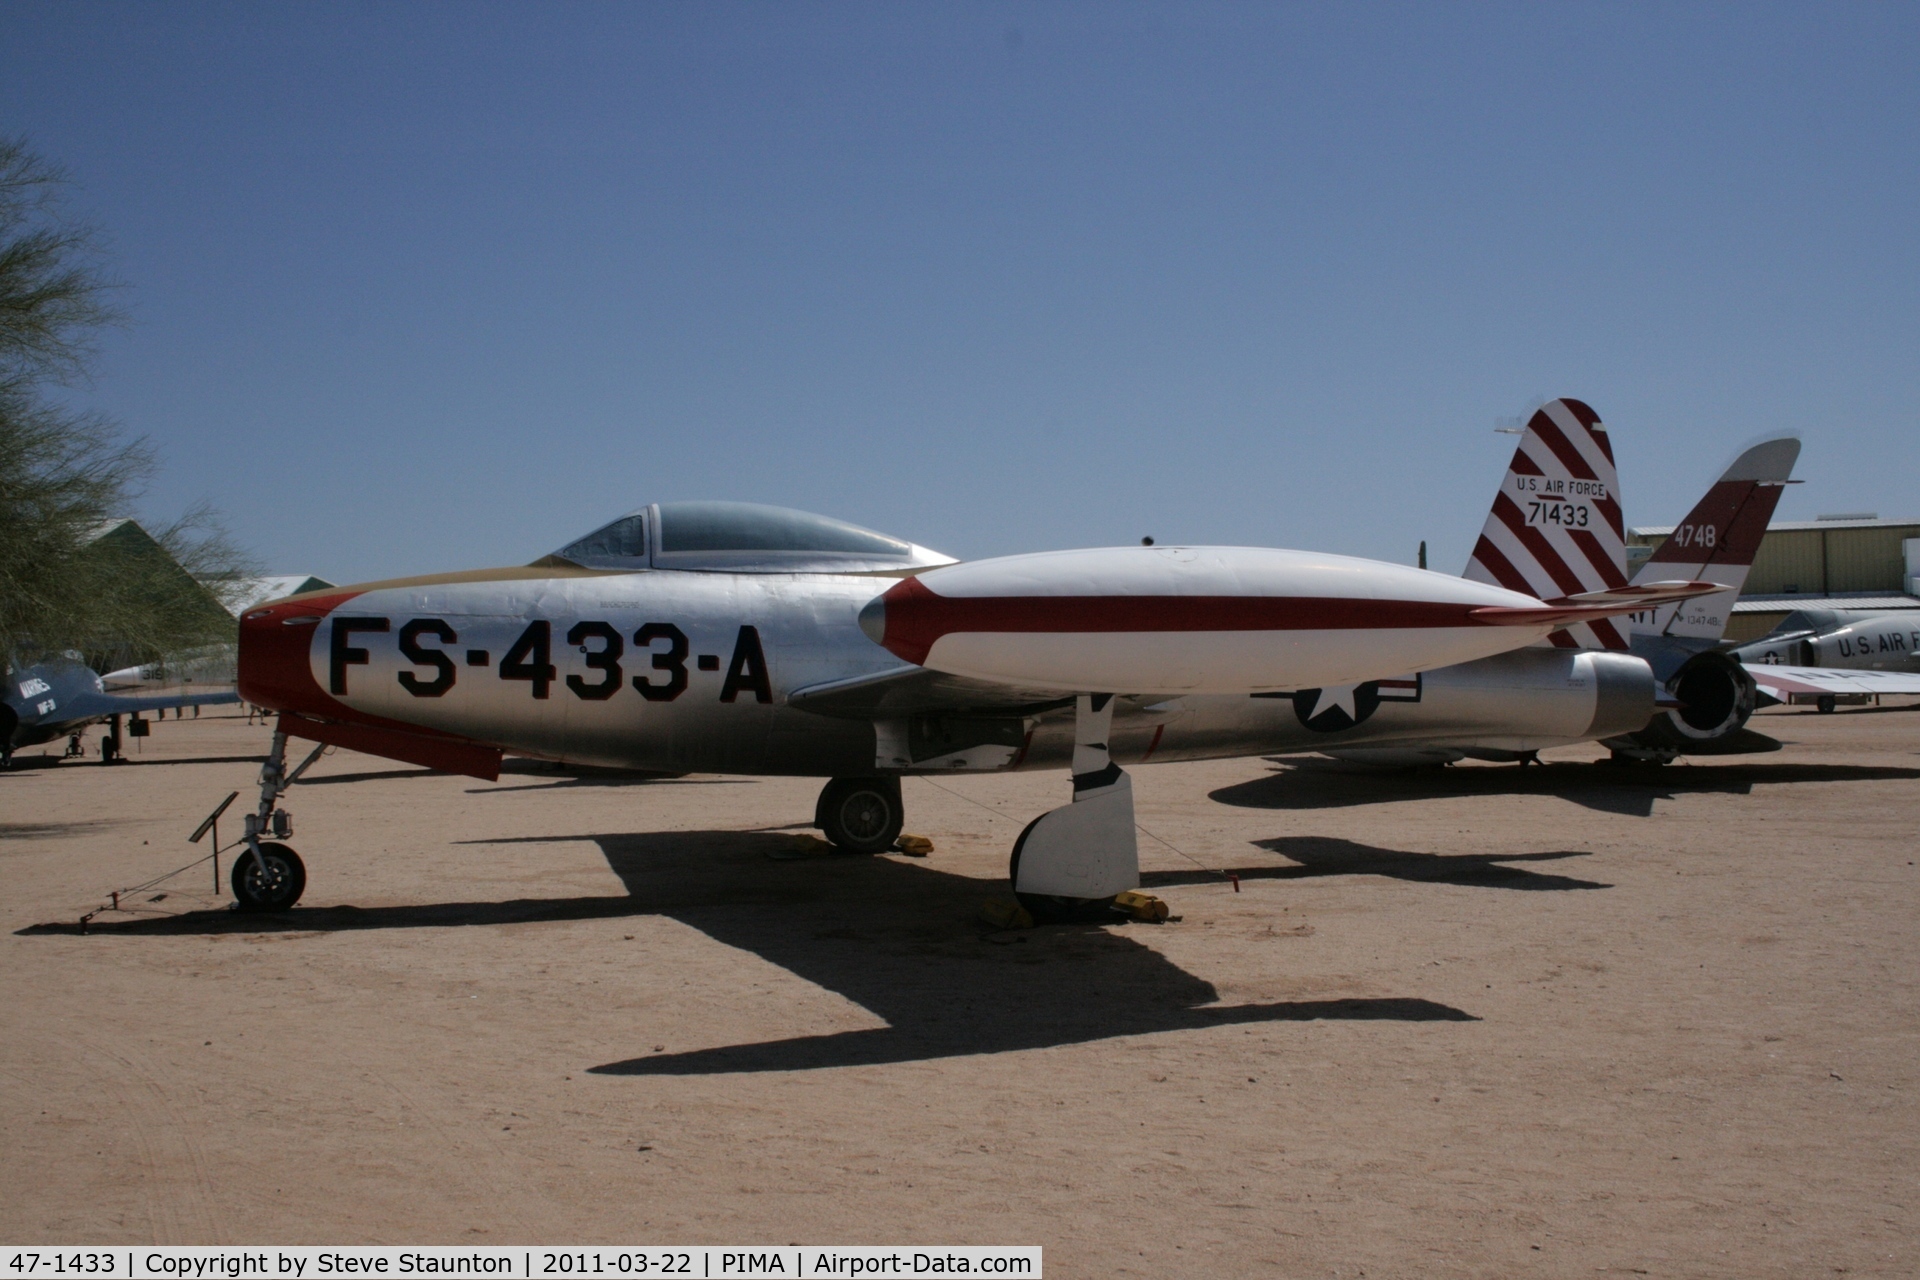 47-1433, 1947 Republic F-84C-2-RE Thunderjet C/N Not found 47-1433, Taken at Pima Air and Space Museum, in March 2011 whilst on an Aeroprint Aviation tour